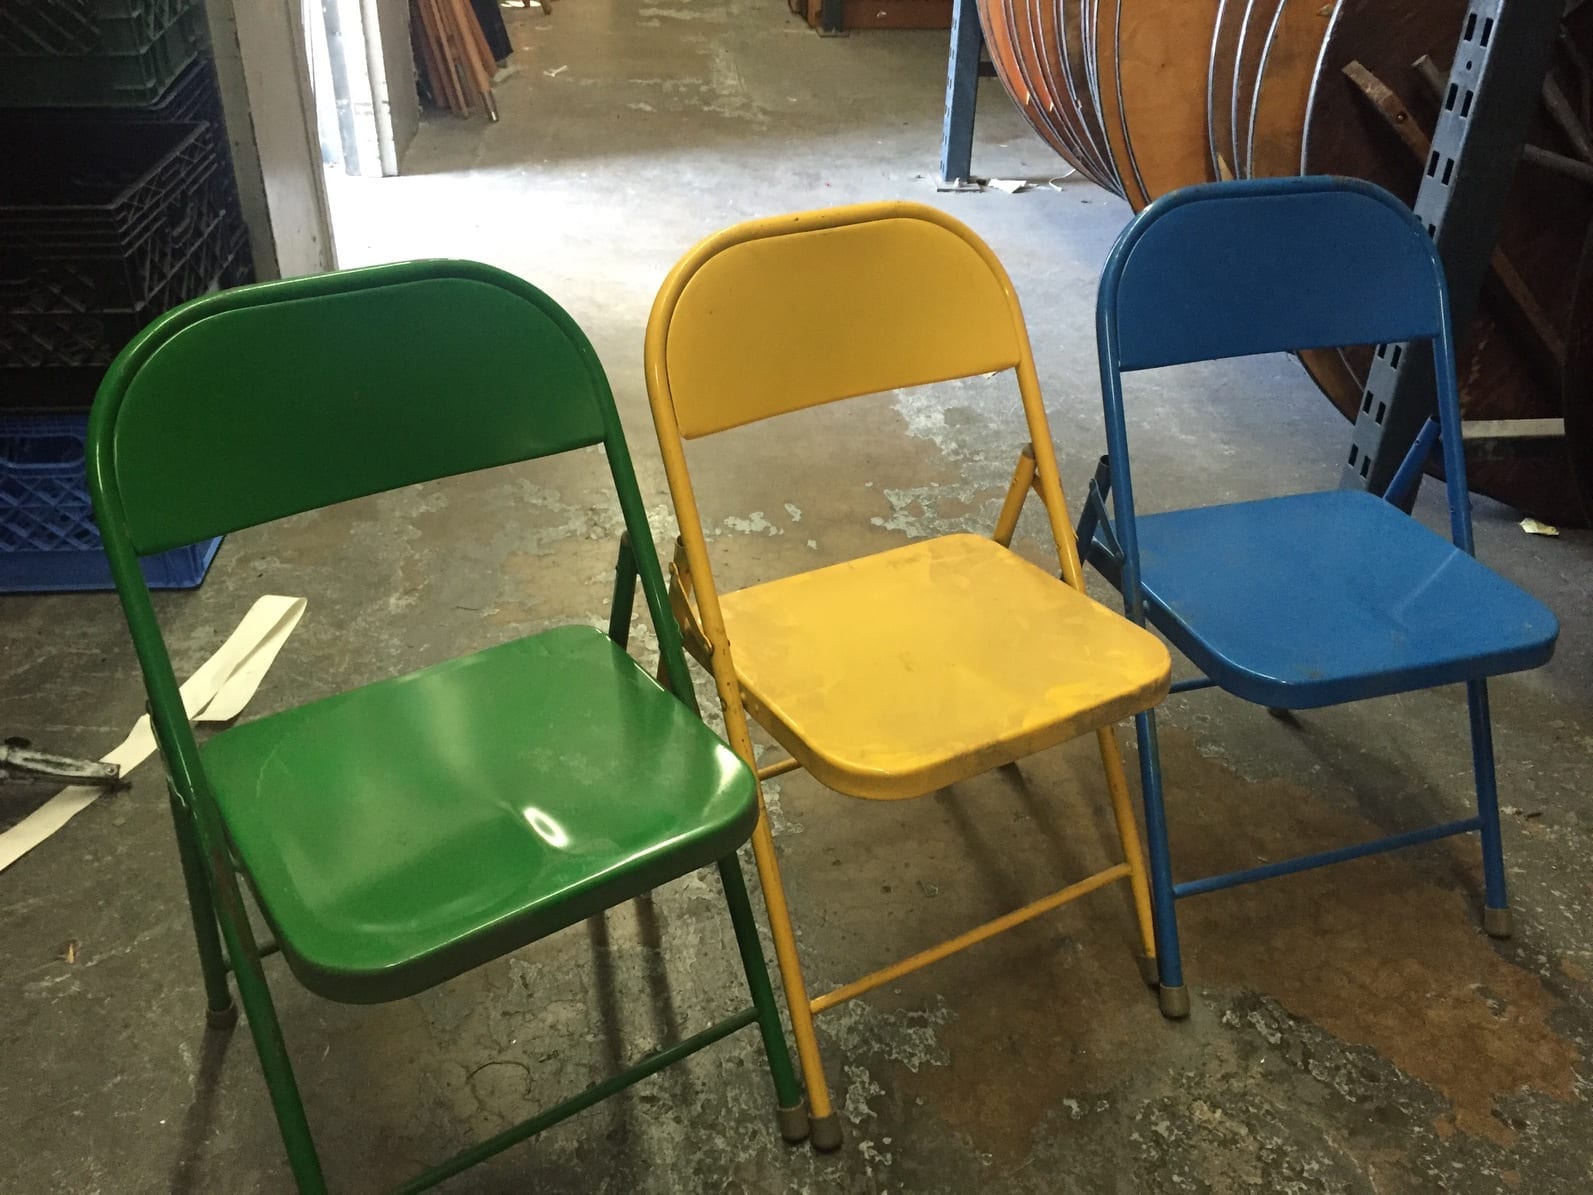 Metal Folding Children Chairs **FOR SALE ONLY** - Del Rey 